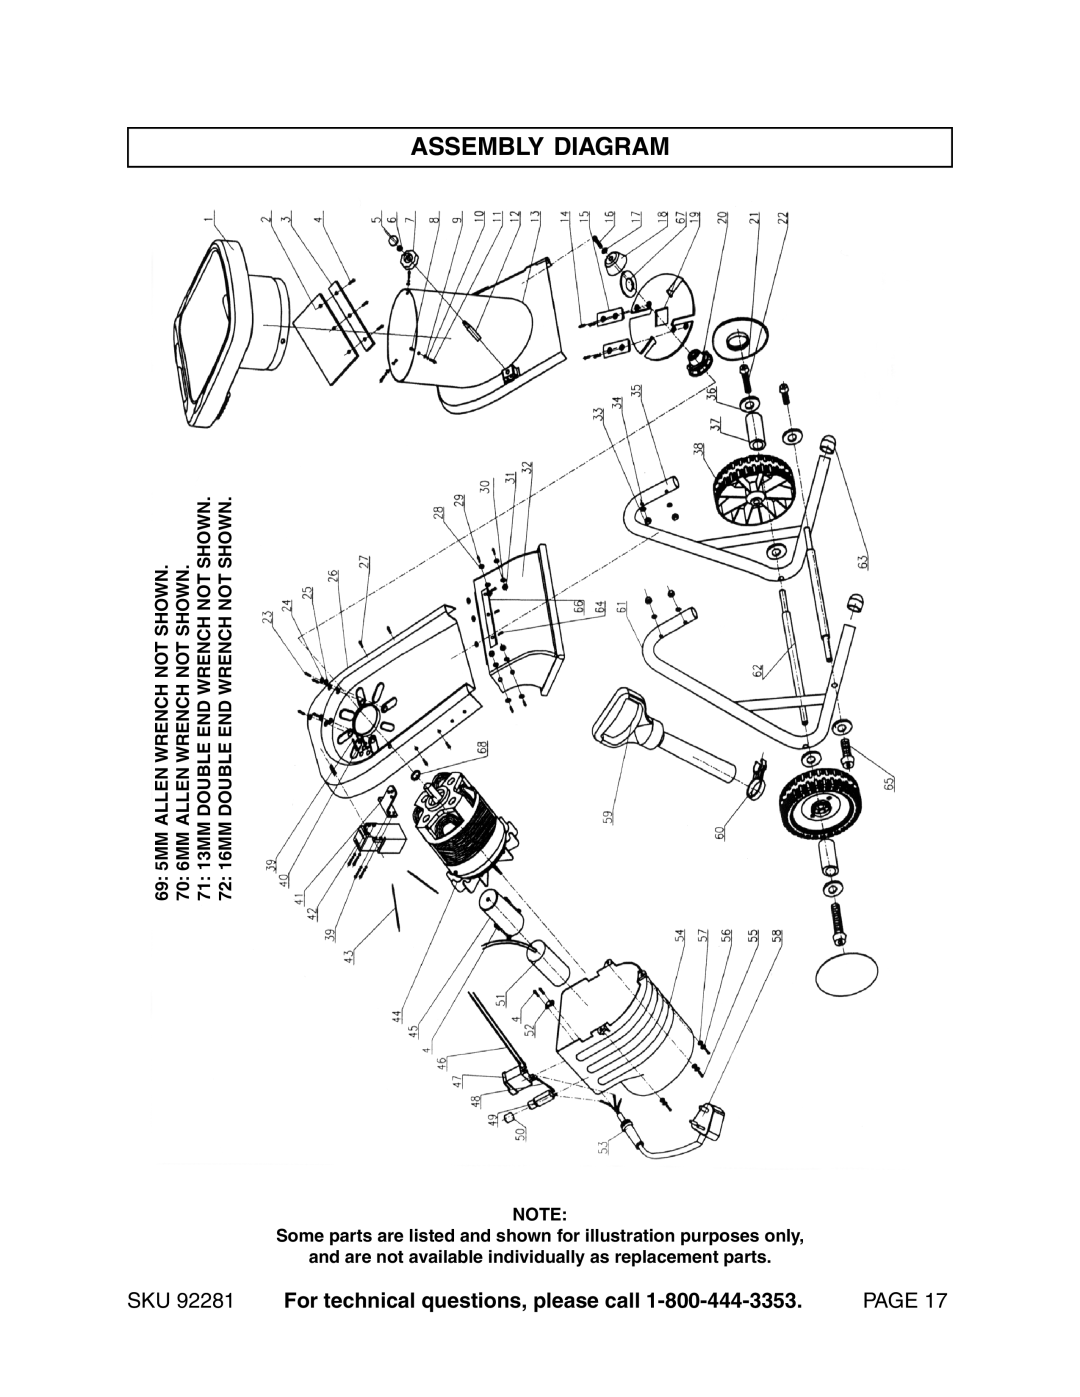 Harbor Freight Tools 92281 manual Assembly Diagram, For technical questions, please call, Page, 5MM ALLEN WRENCH NOT SHOWN 